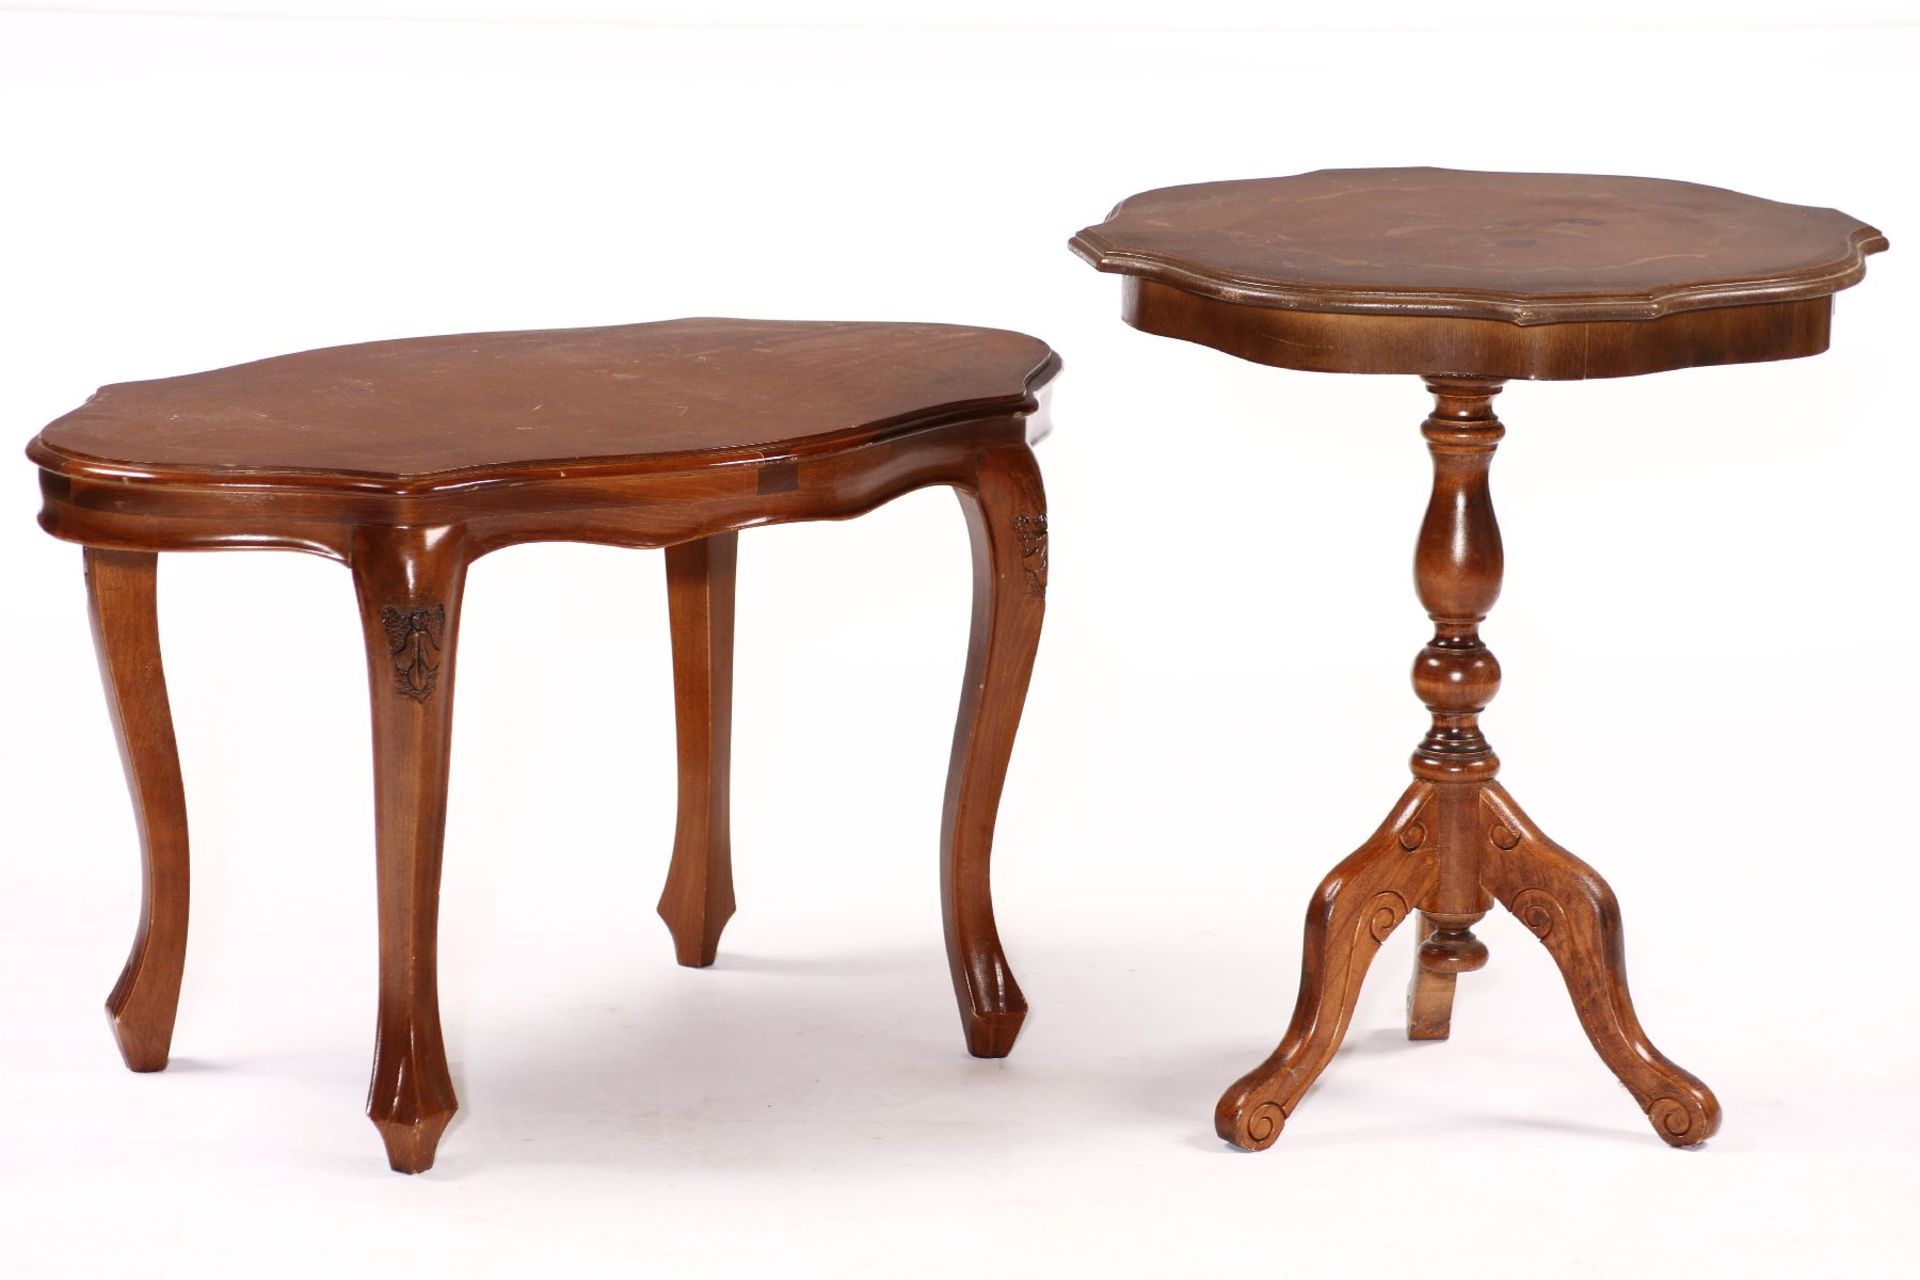 telephone table, partly solid wood, walnut veneer, inlays in shape of flowers and leafing using